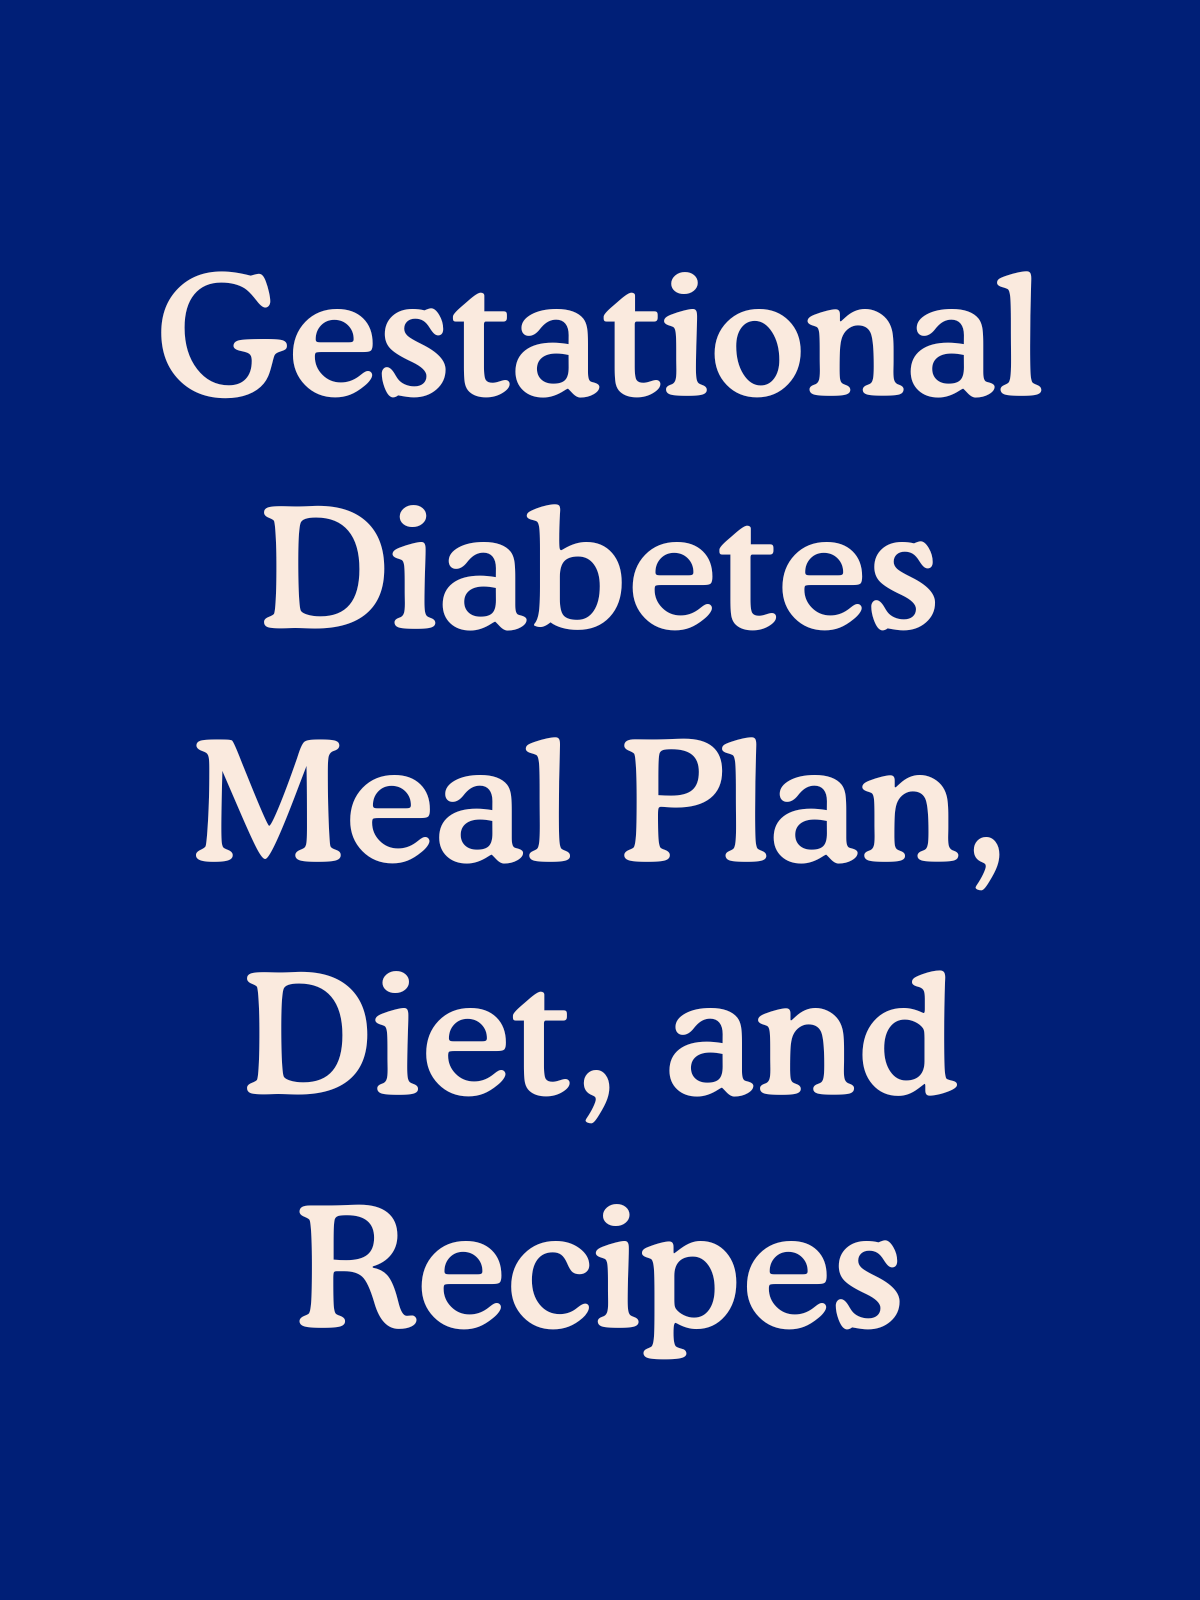 Gestational Diabetes Meal Plan, Diet, and Recipes